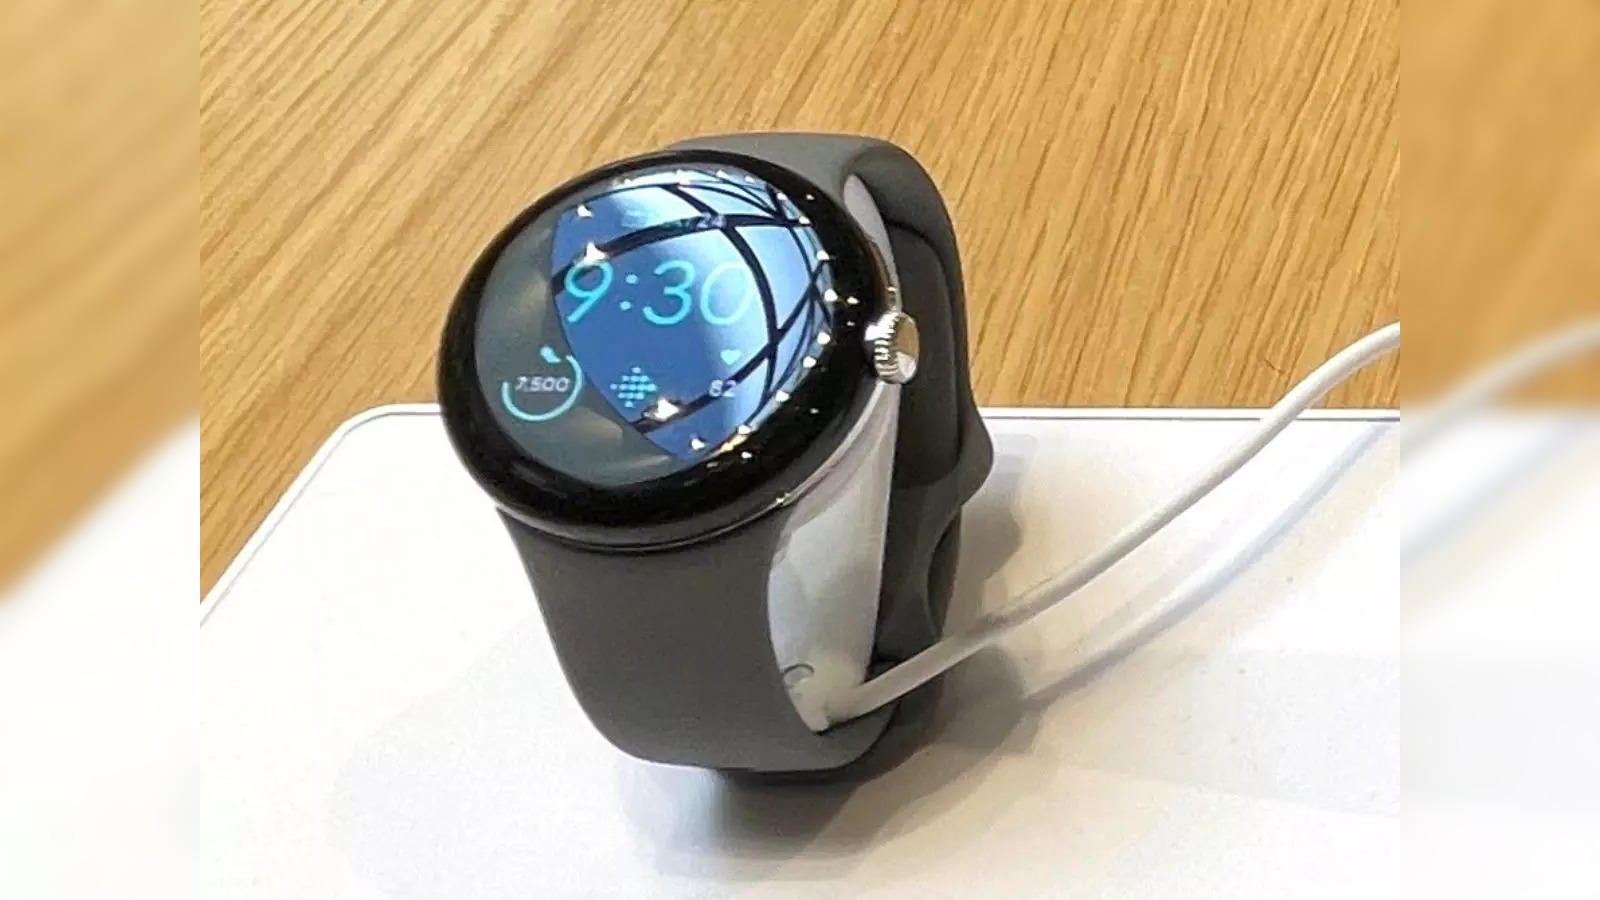 Google Pixel Watch price: Google Pixel Watch launched at Rs 28K. Tech  giant's first smartwatch comes with WearOS and Fitbit features - The  Economic Times